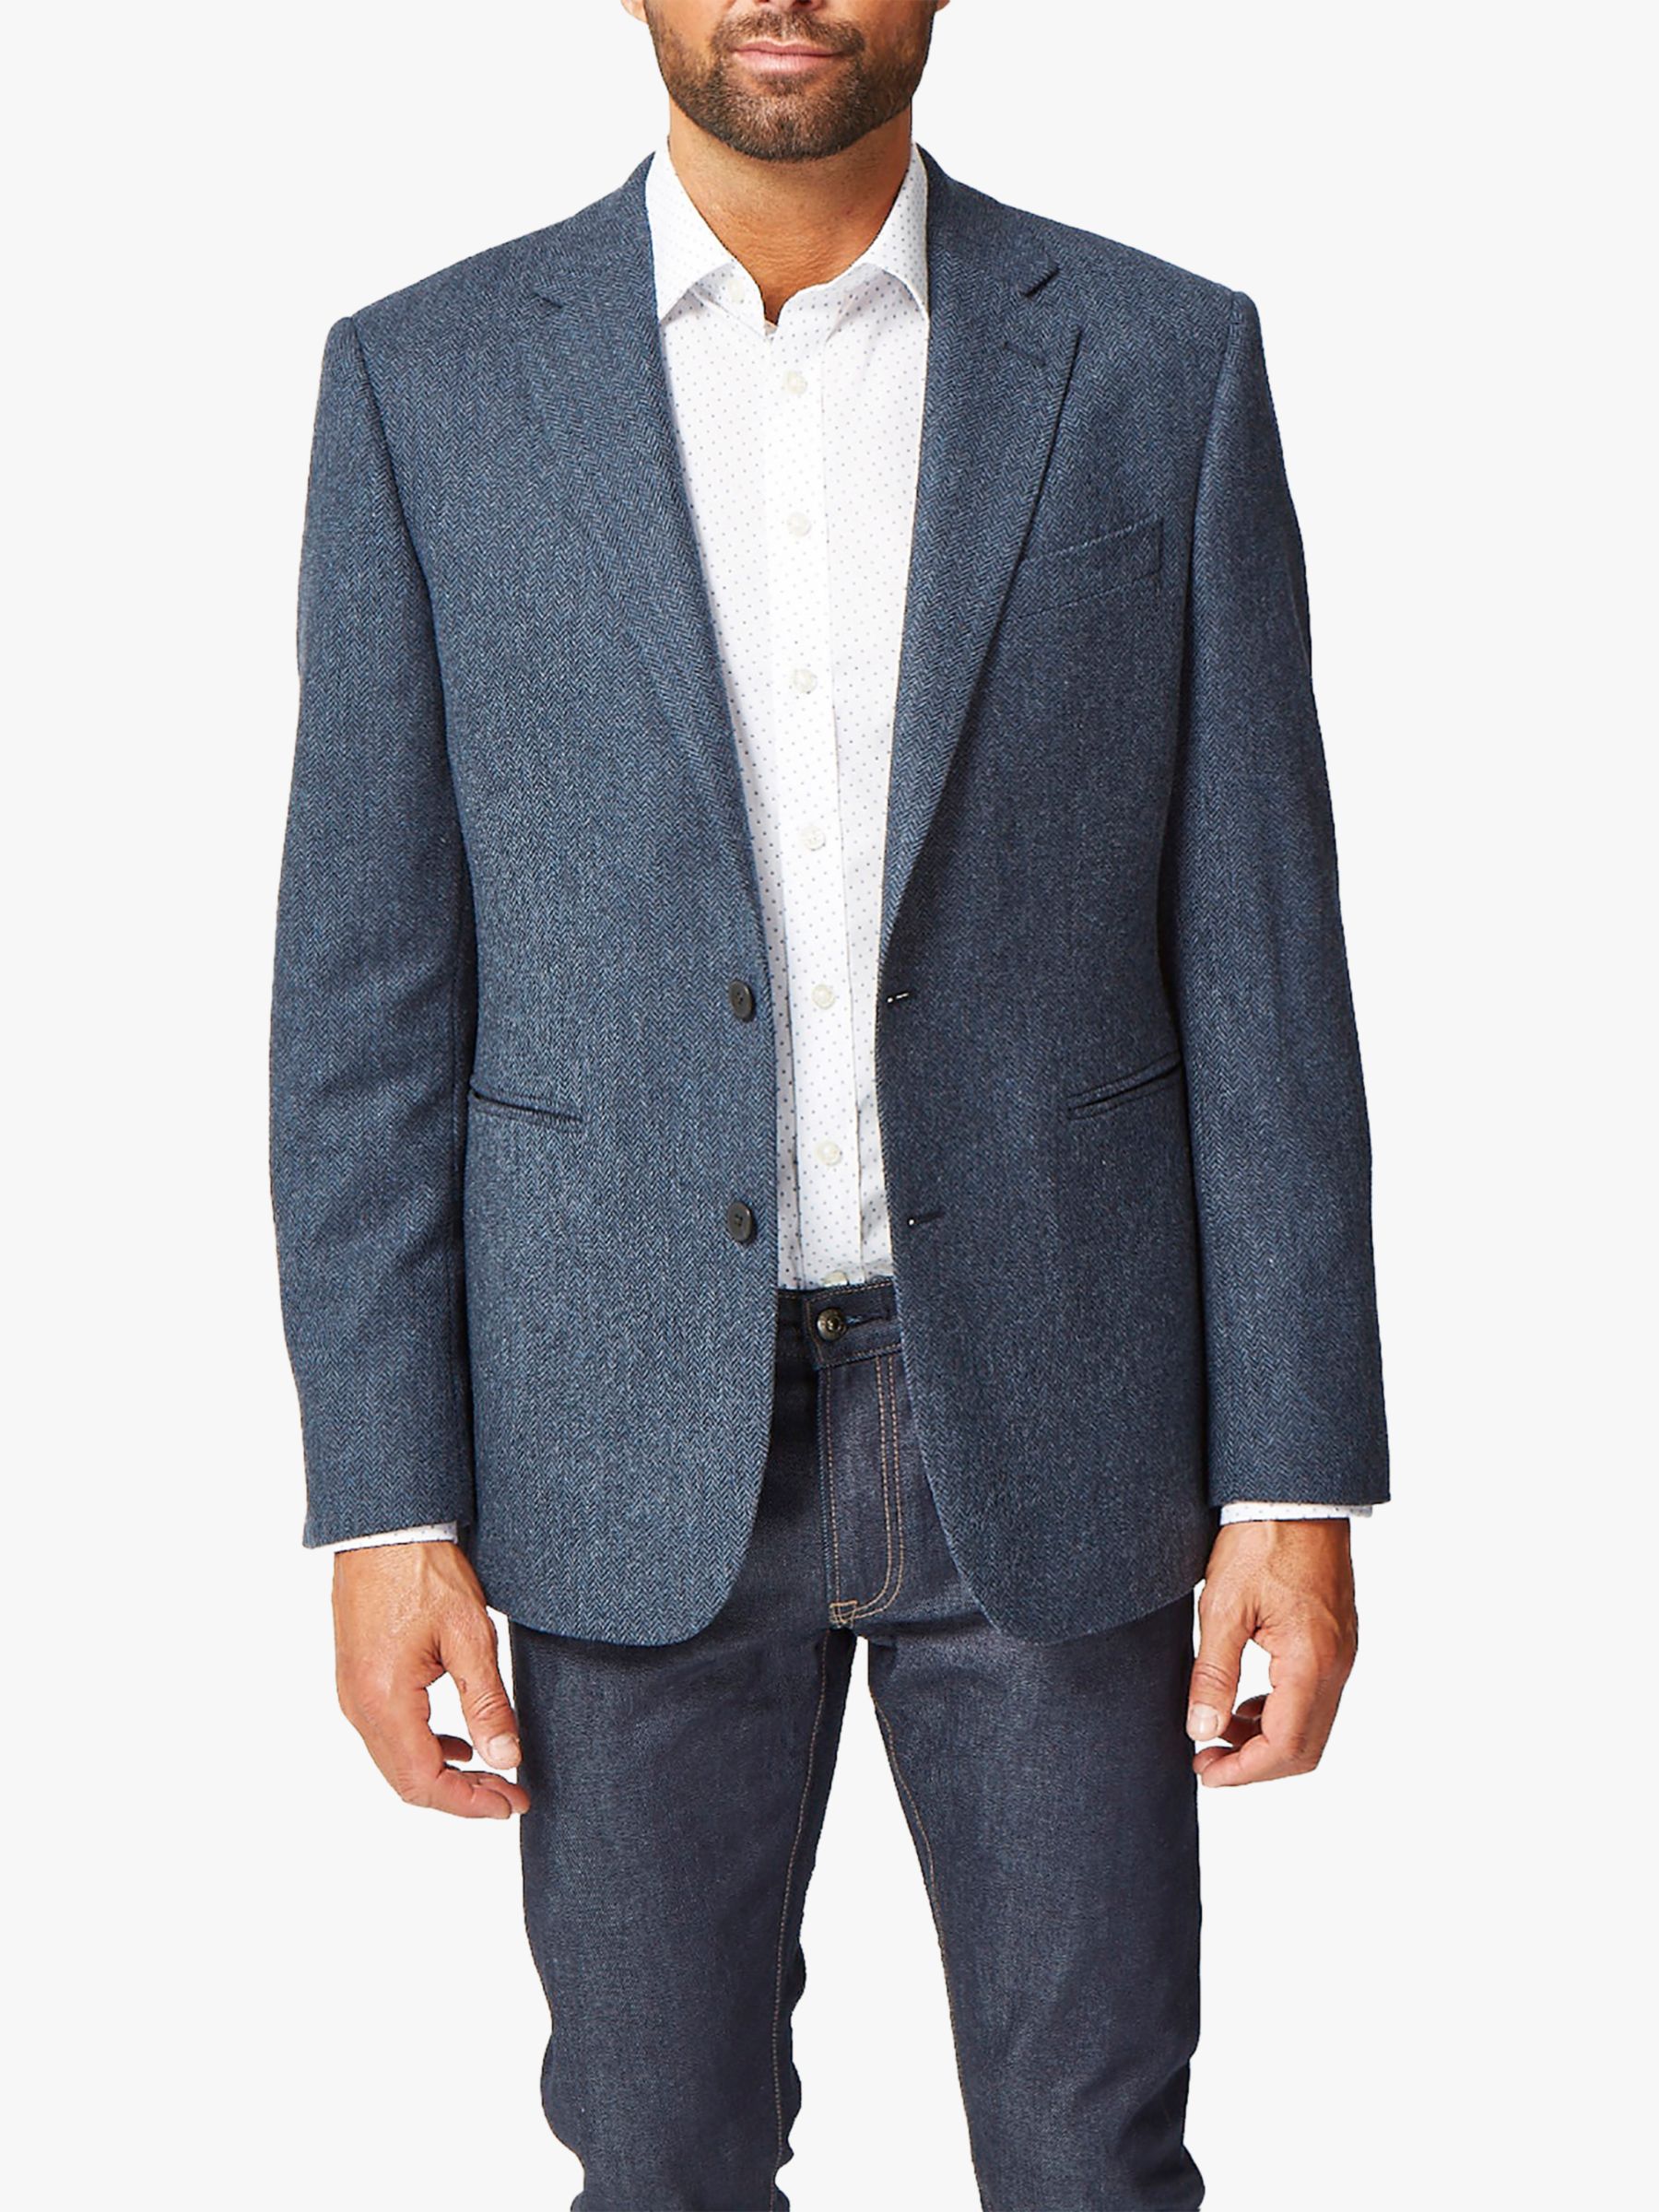 Chester by Chester Barrie Herringbone Weave Suit Jacket, Navy at John ...